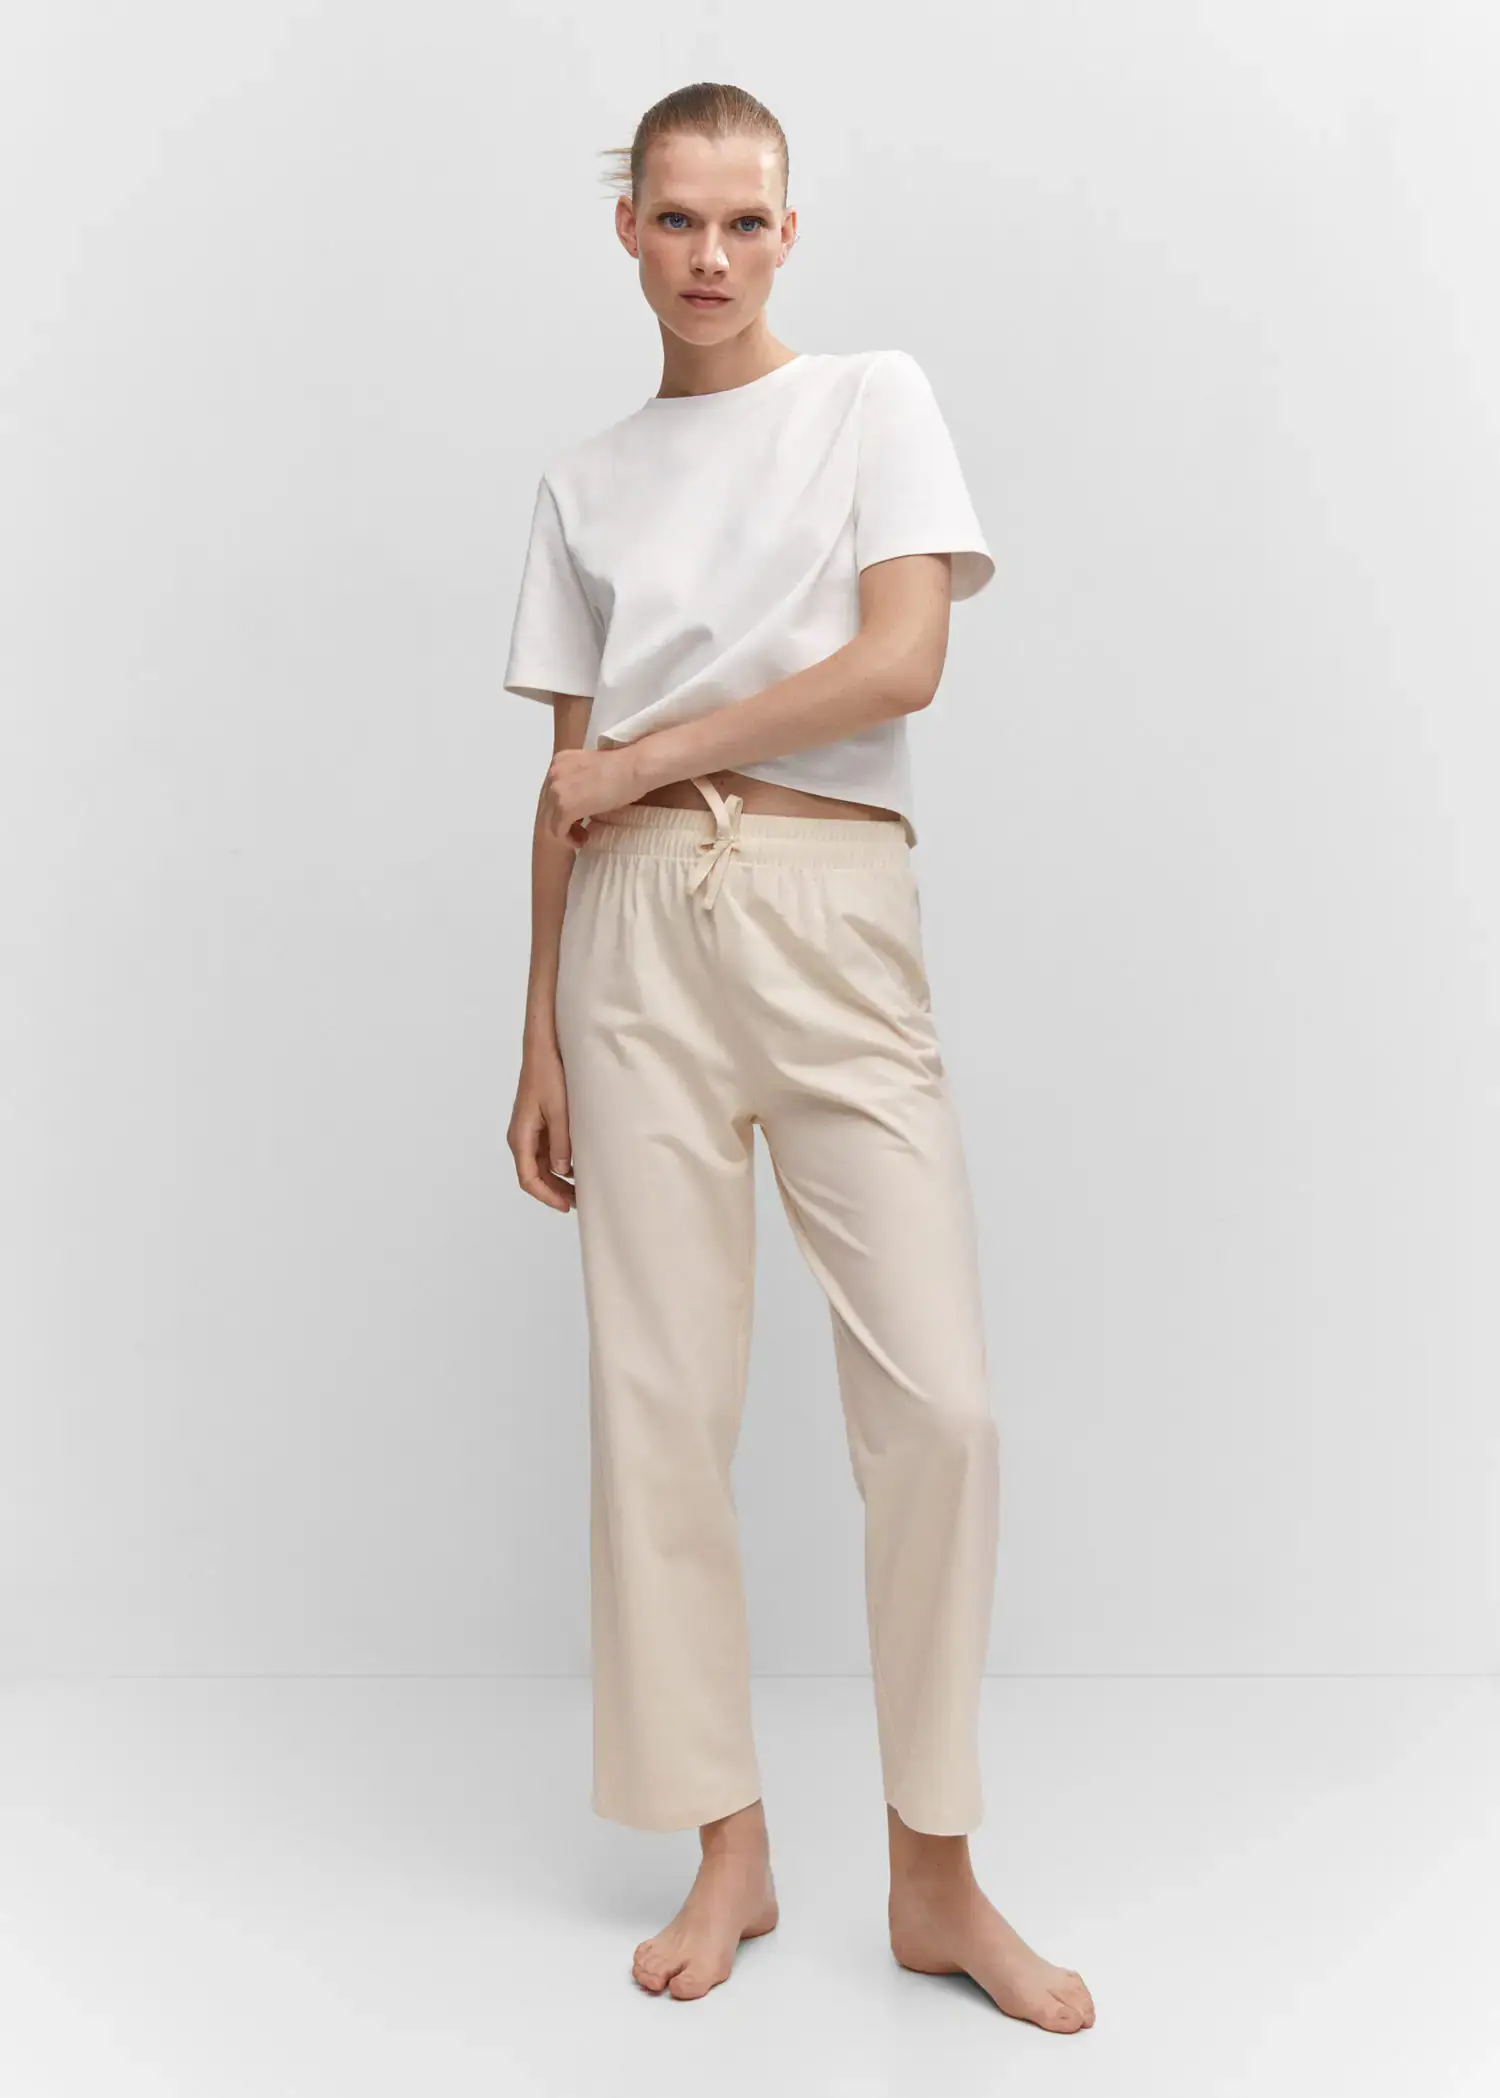 Mango Cotton-knit trousers. a person standing wearing a white shirt and beige pants. 